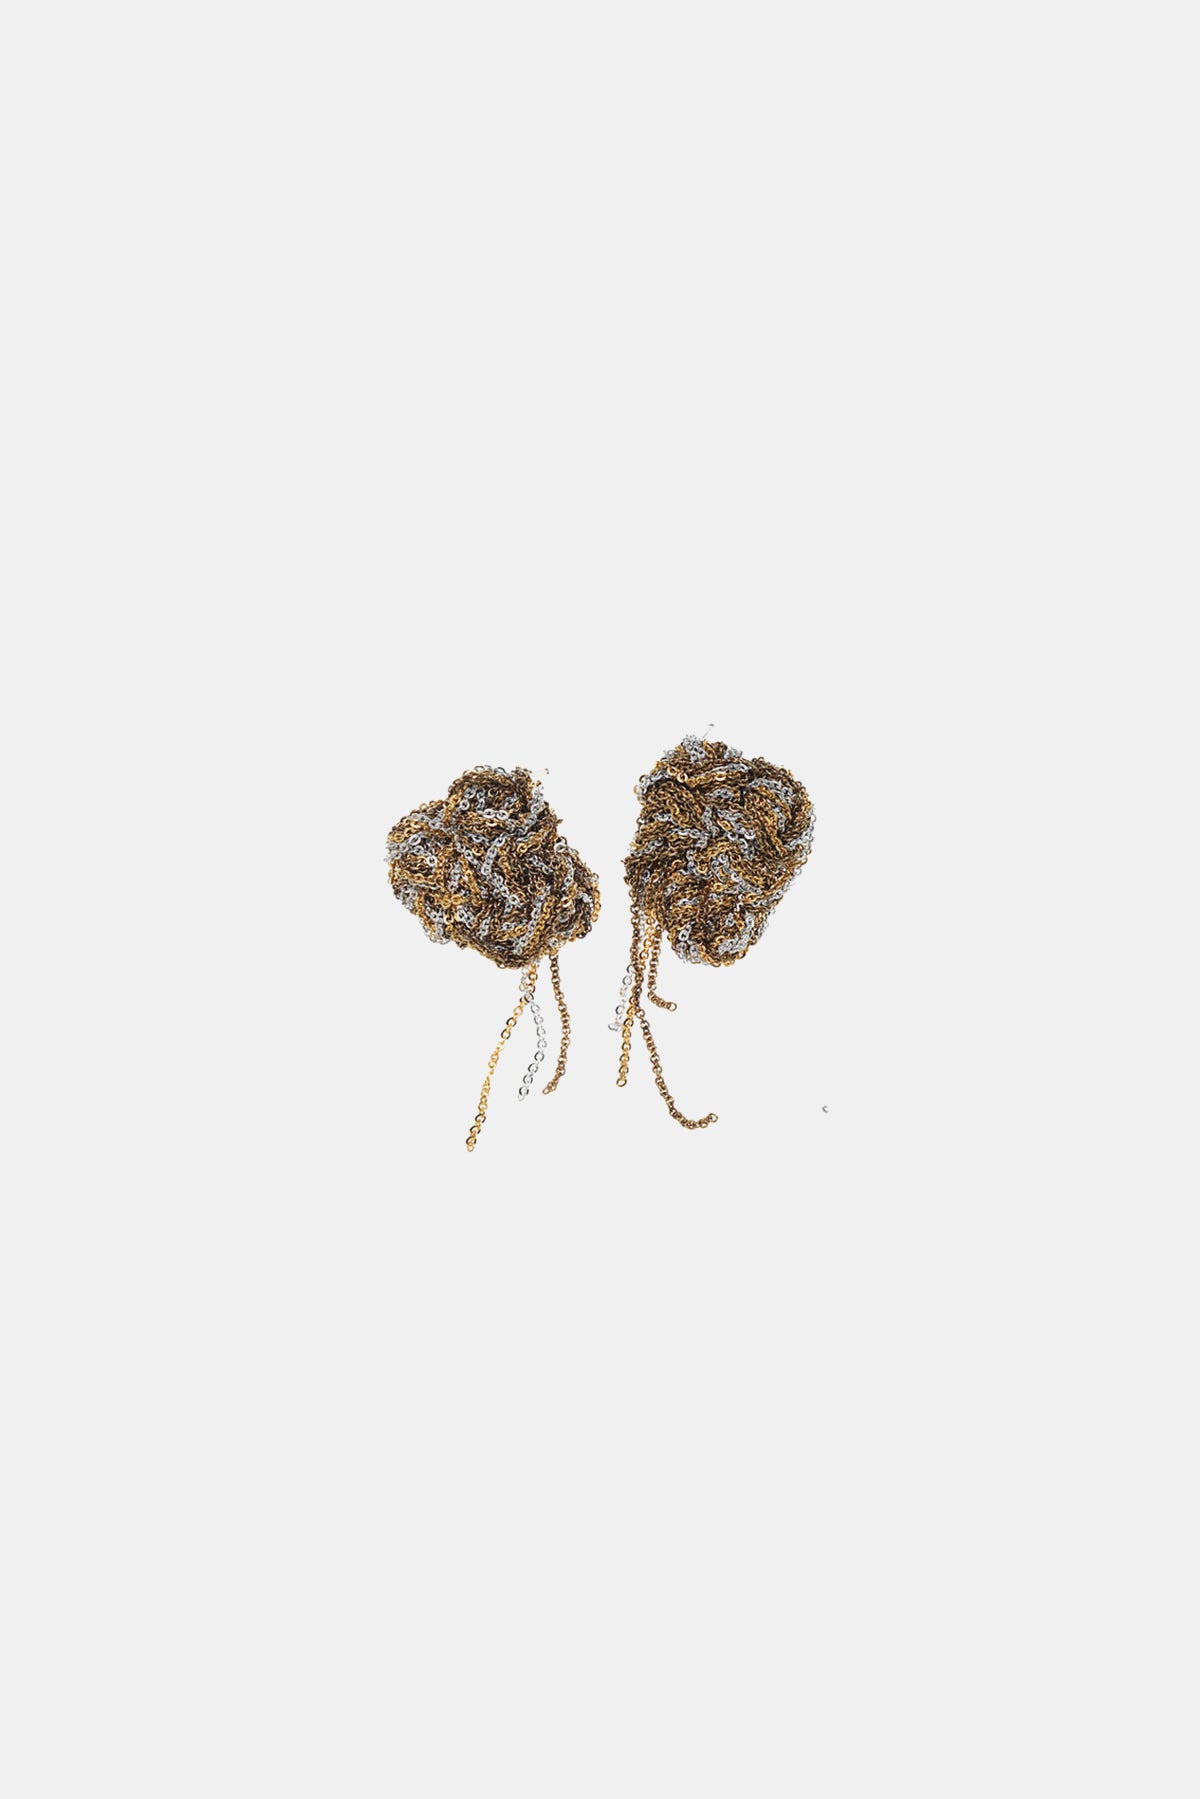 Arielle De Pinto Blended Nugget Earrings in Gold and Silver